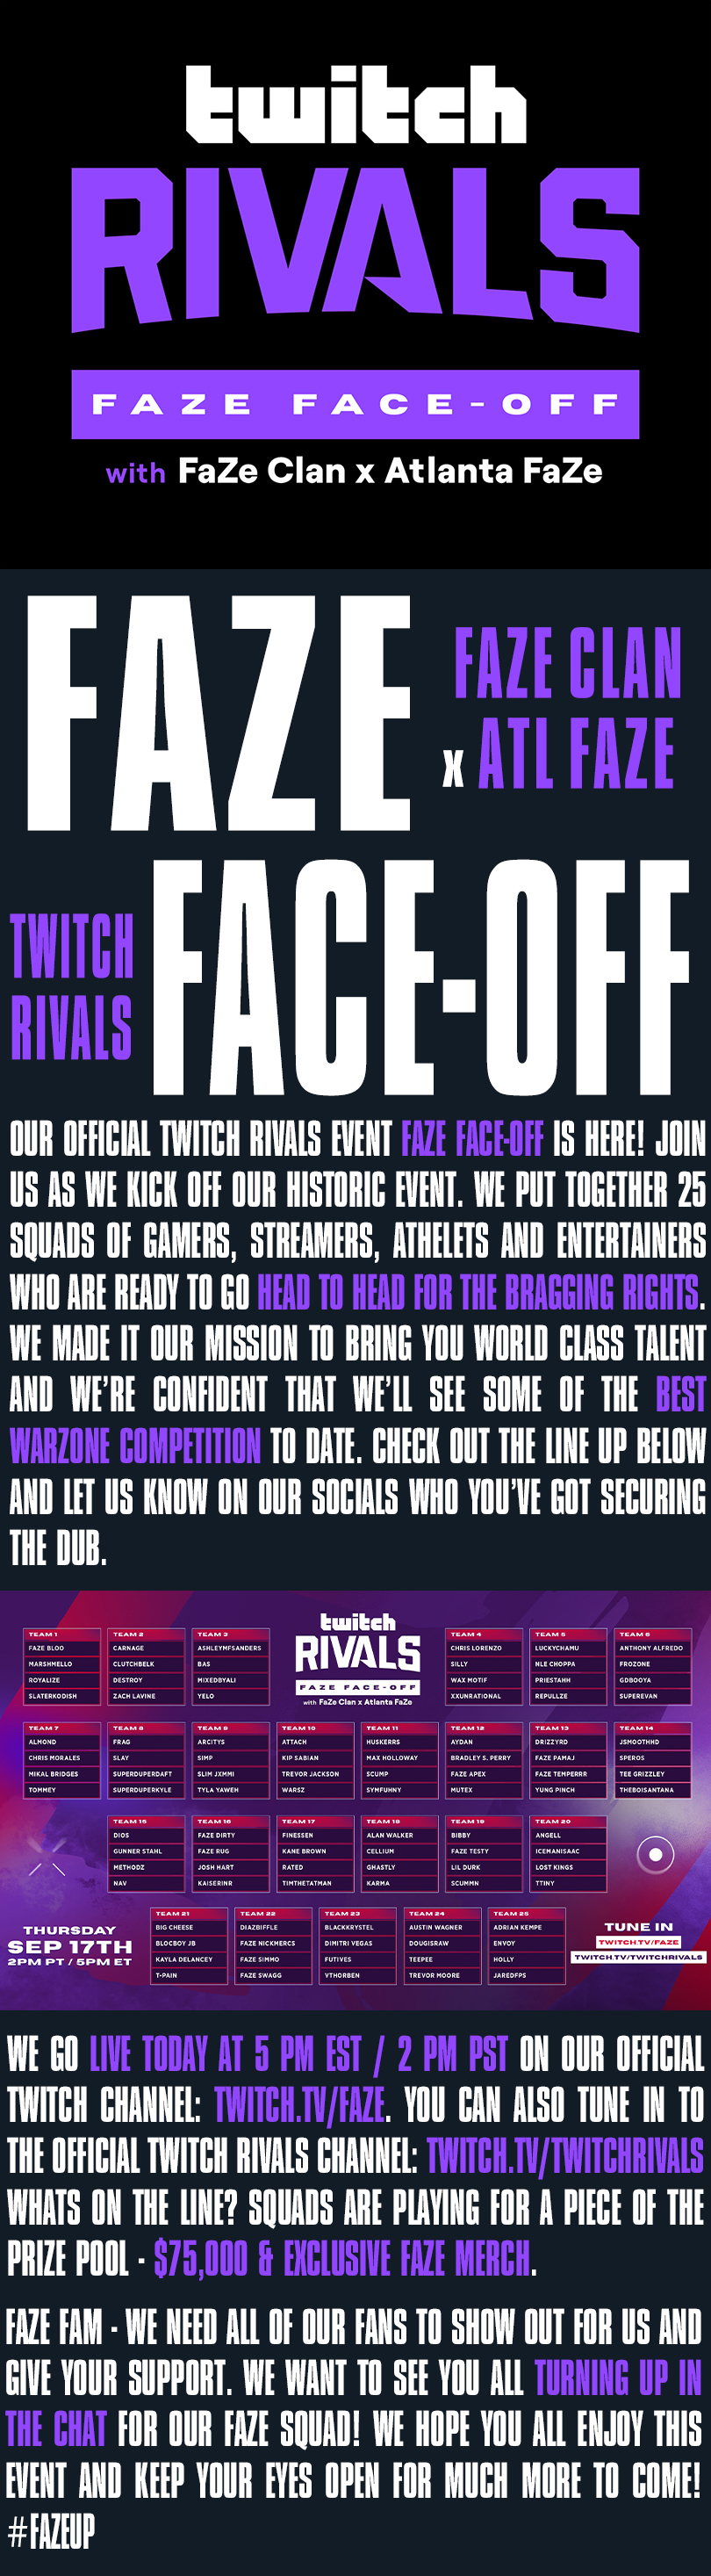 The Official FaZe Clan Twitch Channel